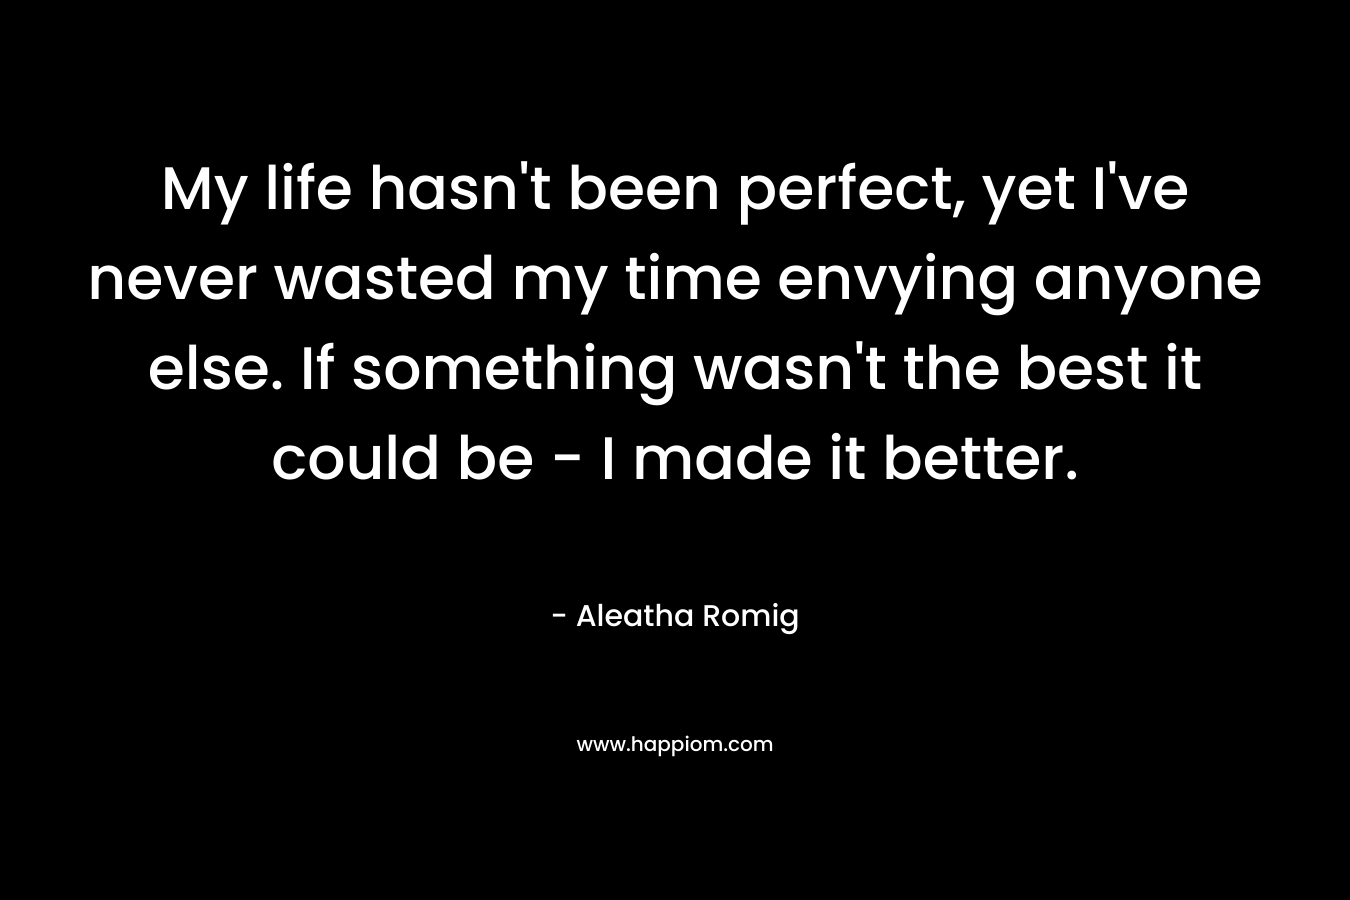 My life hasn’t been perfect, yet I’ve never wasted my time envying anyone else. If something wasn’t the best it could be – I made it better. – Aleatha Romig